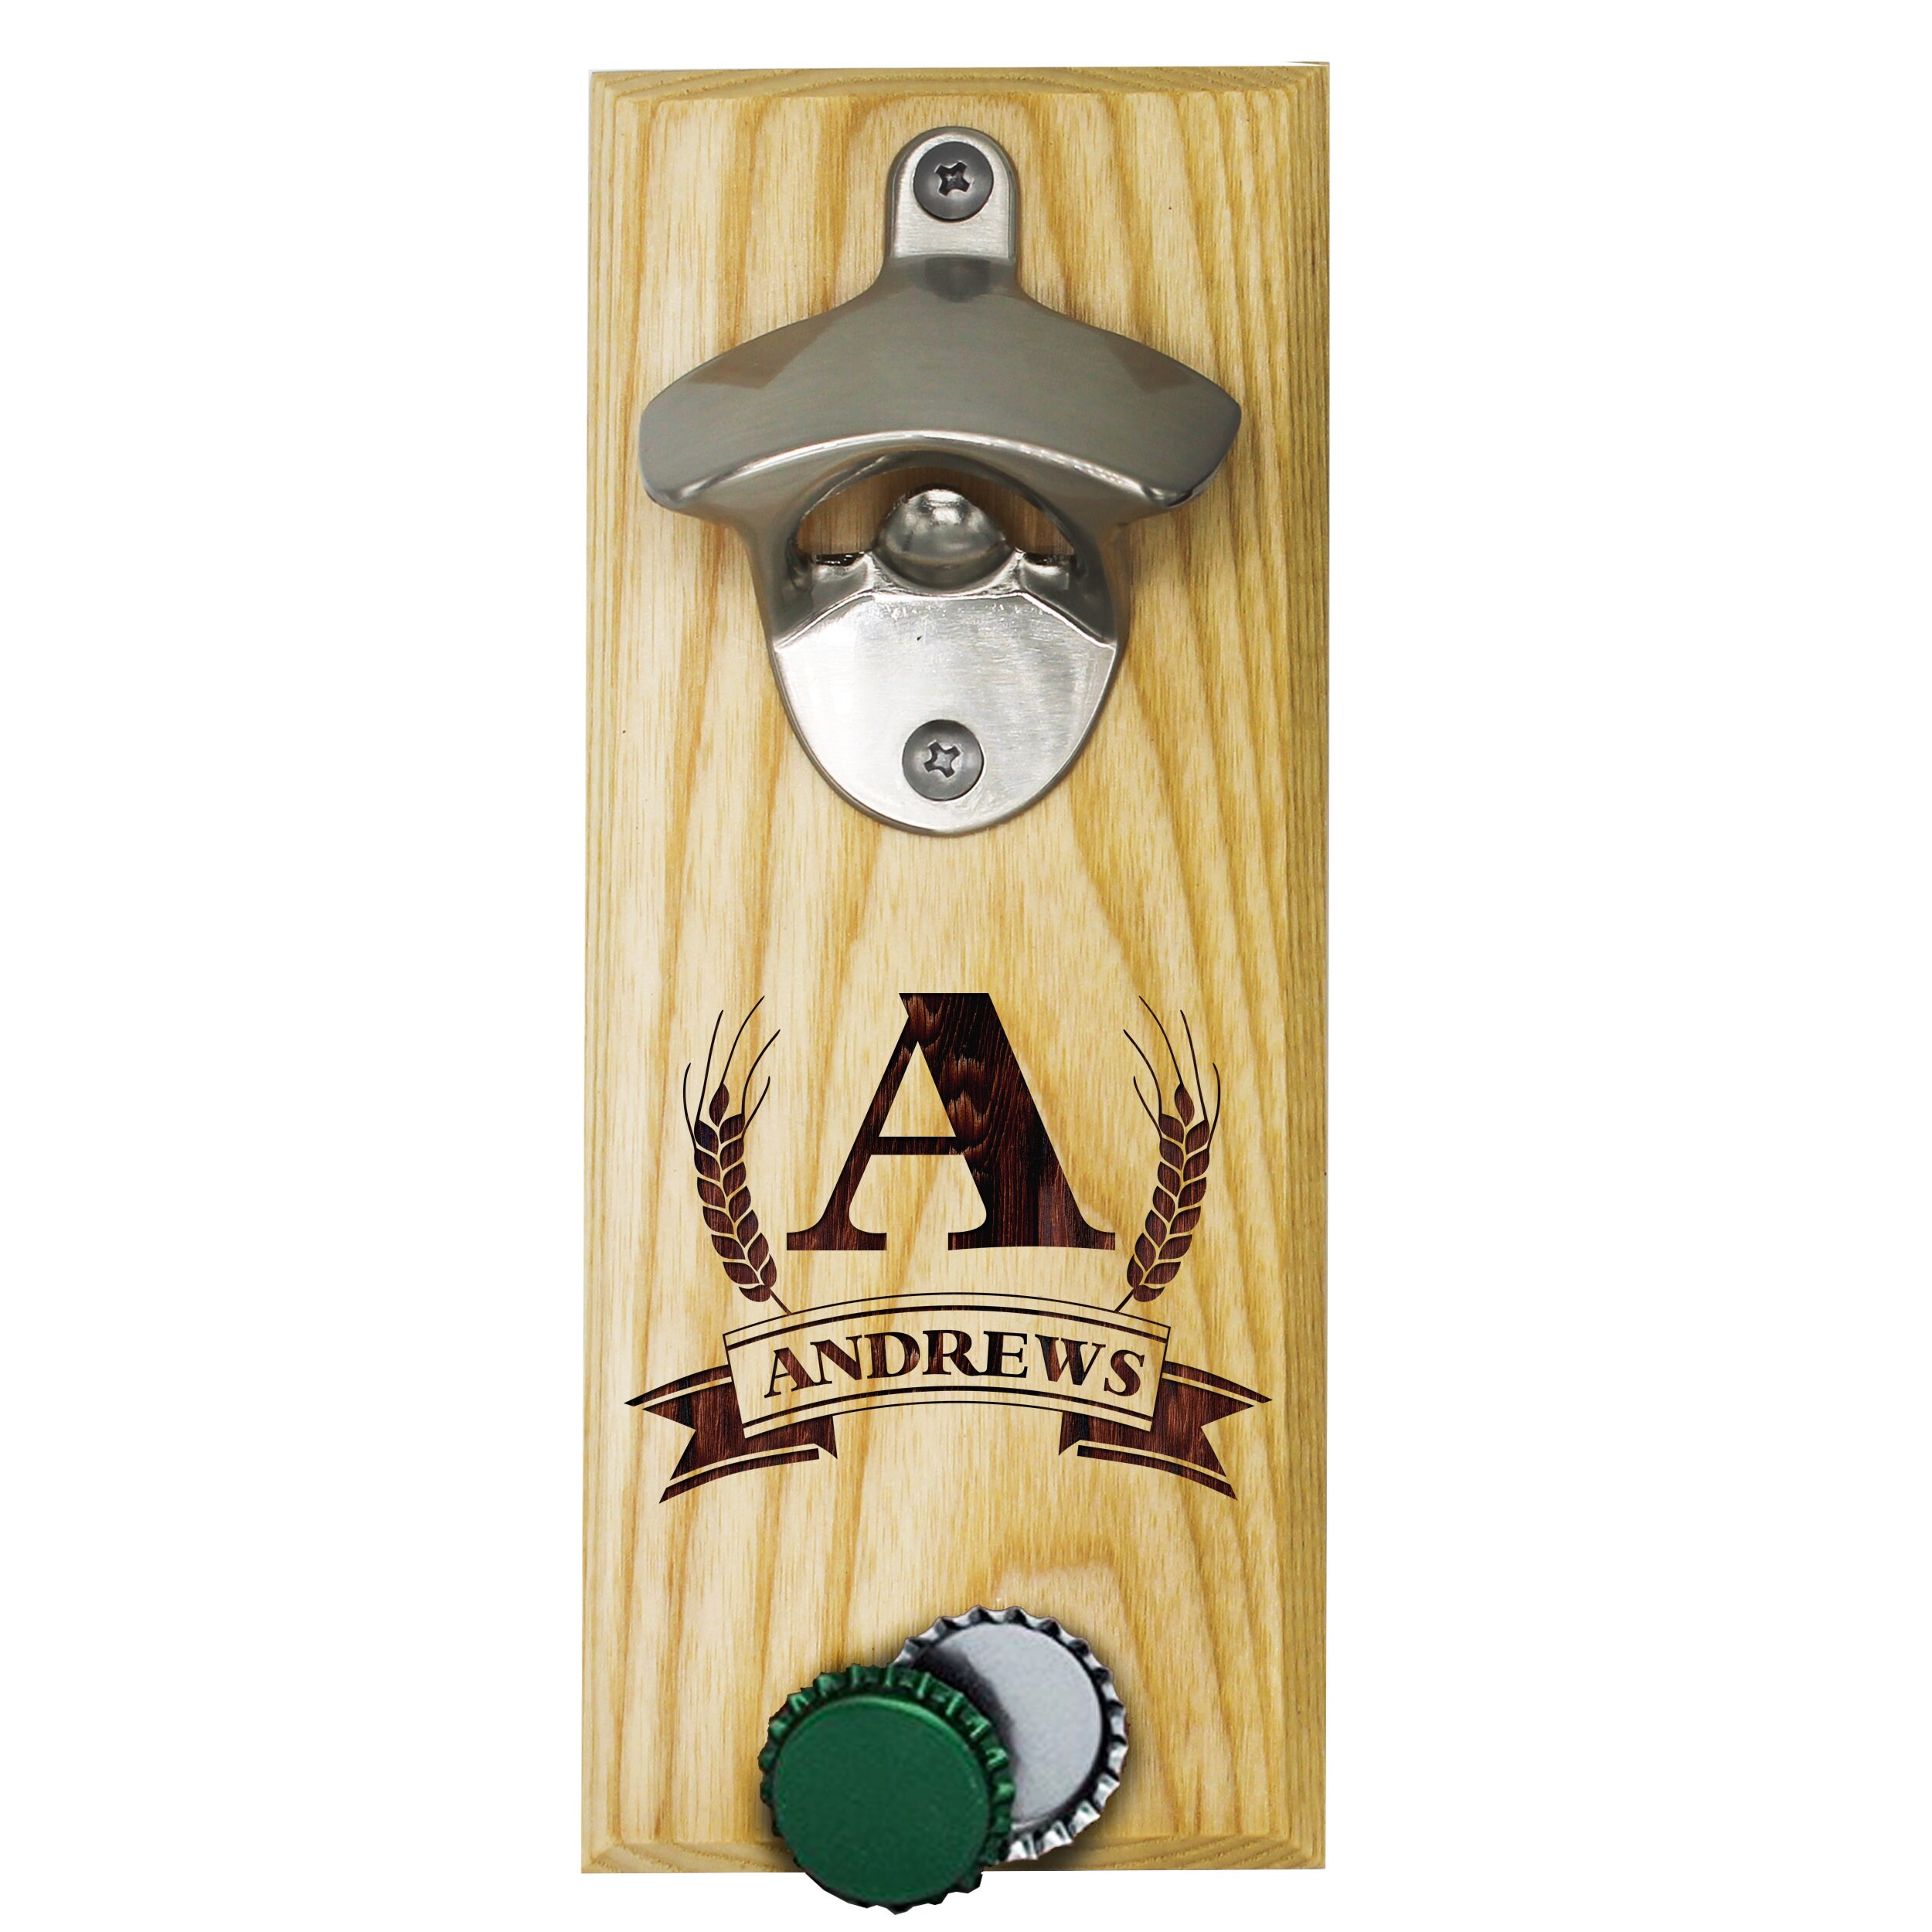 HST77803 Magnetic Bamboo Wall Mounted Bottle Opener With Custom